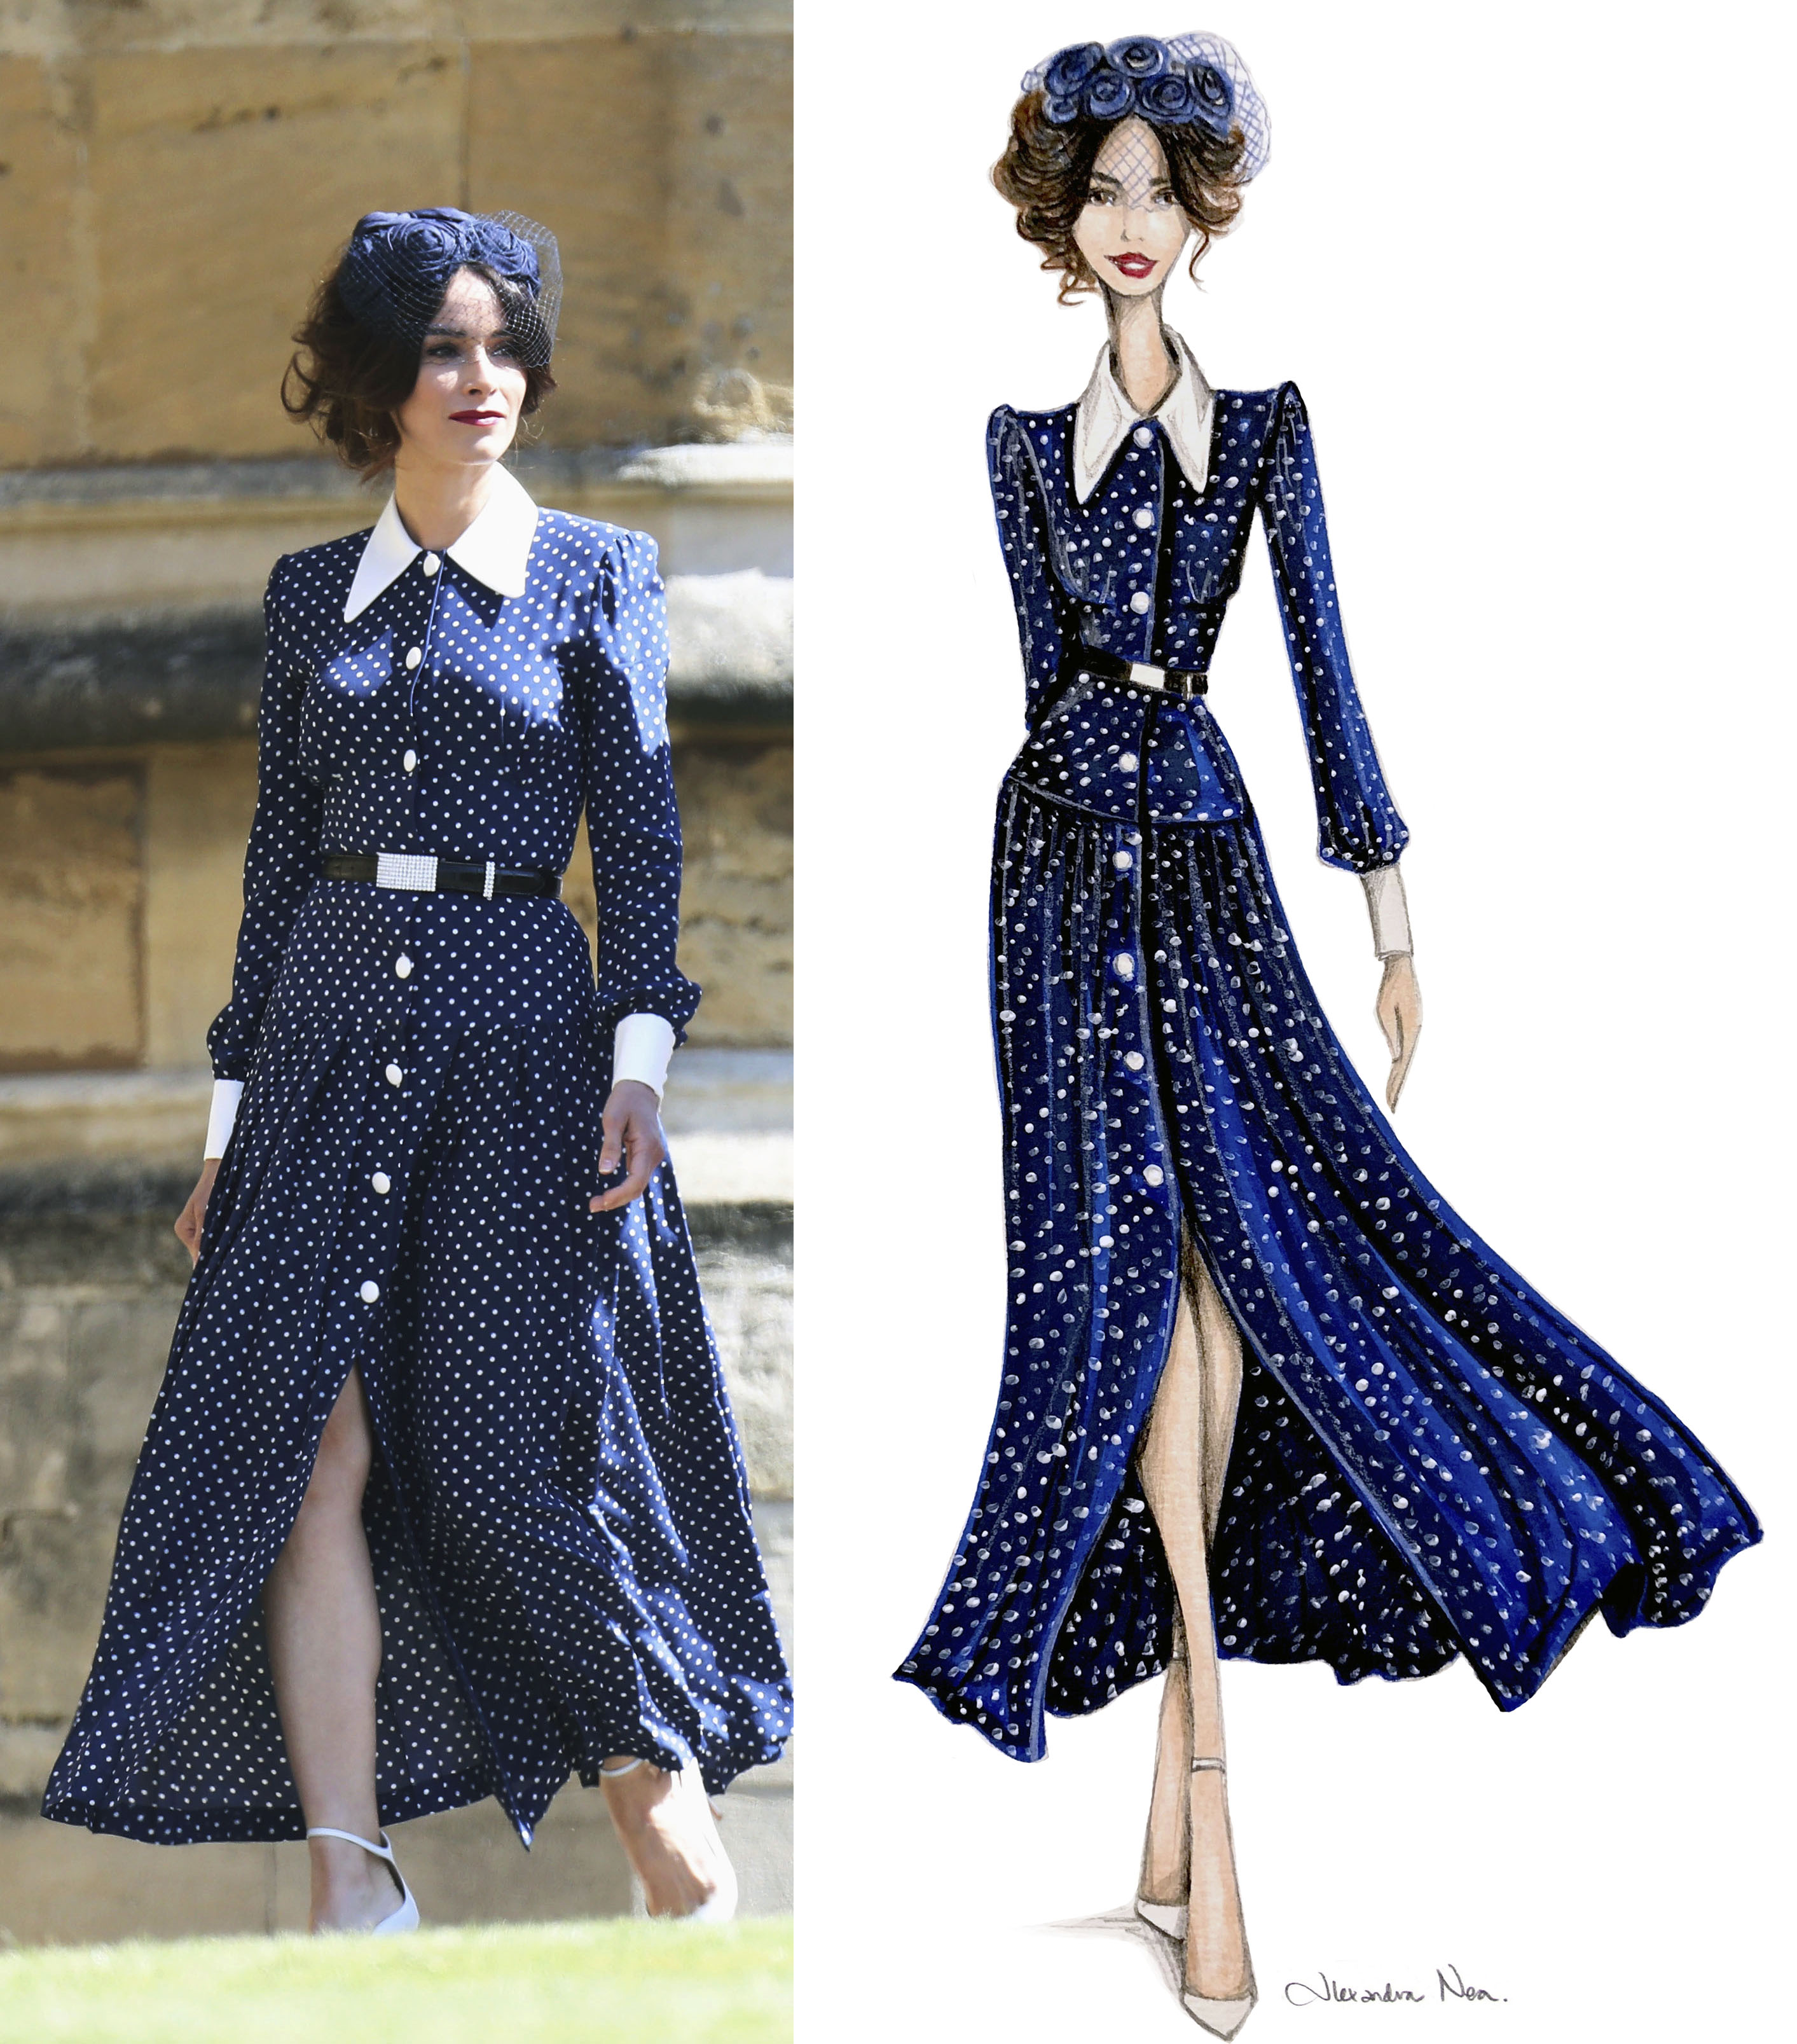 Abigail Spencer IRL and an illustration of her at the wedding of Prince Harry and Meghan Markle by Alexandra Nea (Chris Jackson/AP/PA/Alexandra Nea)